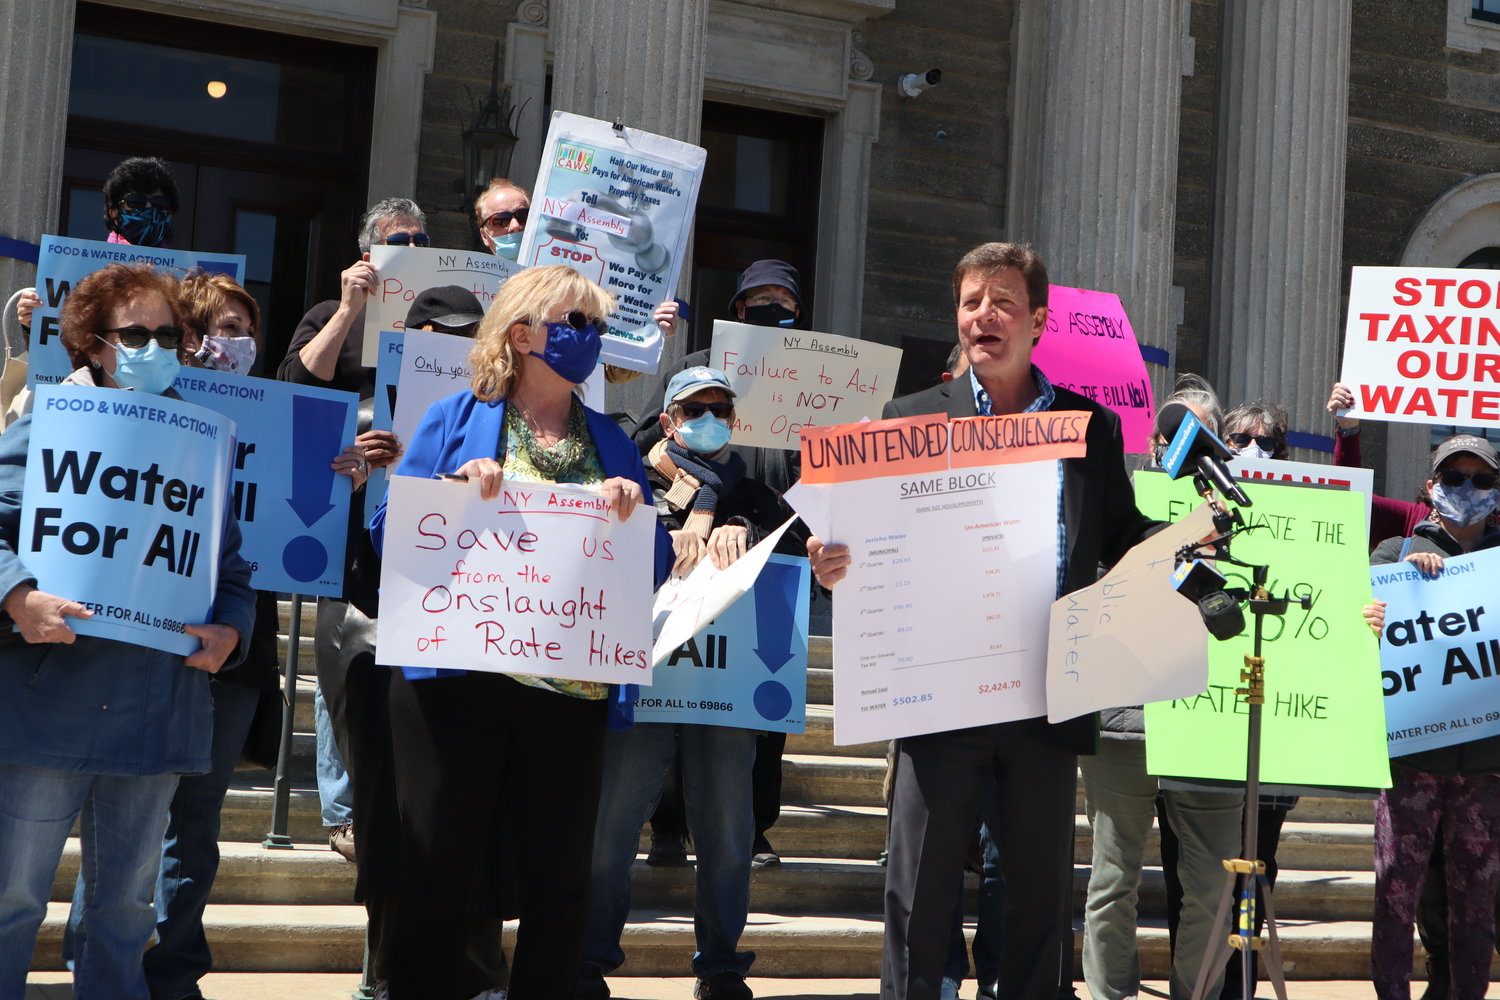 Claudia Borecky and David Denenberg, co-directors of the Merrick-based advocacy group Long Island Clean Air, Water and Soil, joined others in April to advocate for the legislation that now awaits the governor’s signature.